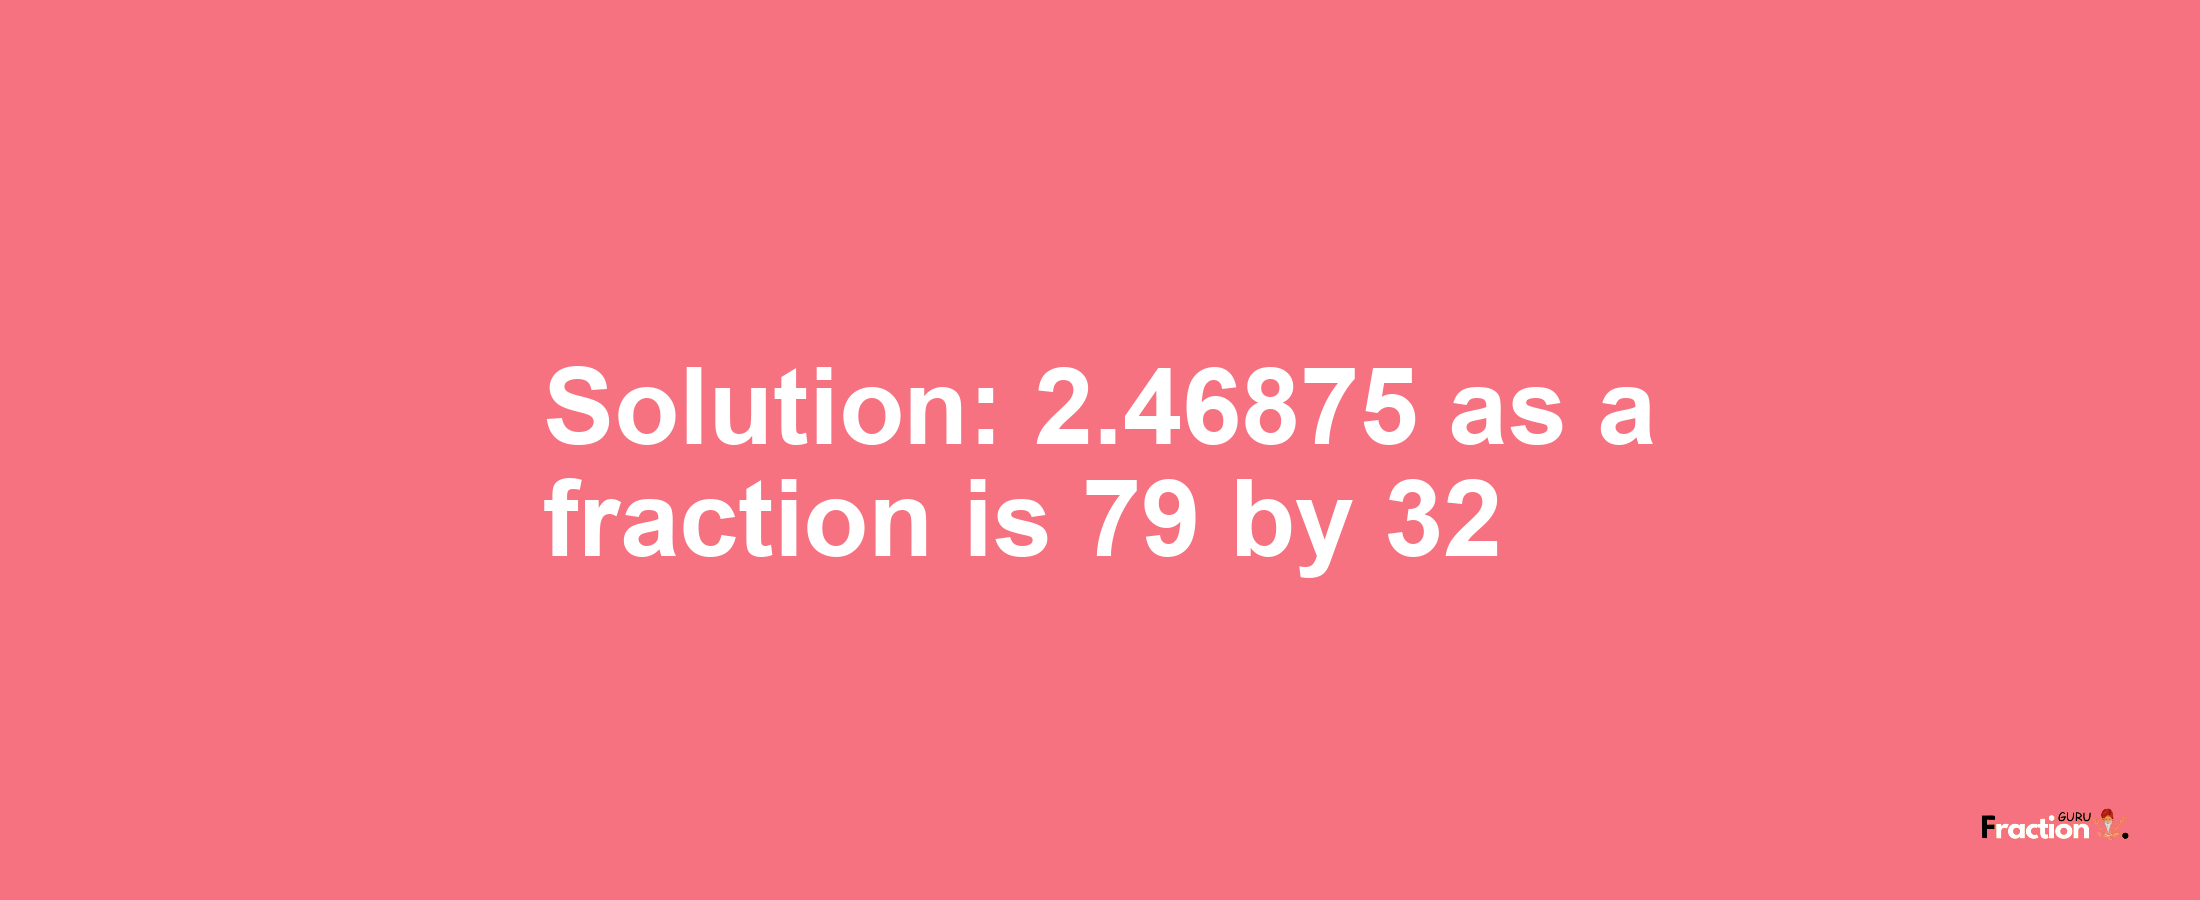 Solution:2.46875 as a fraction is 79/32